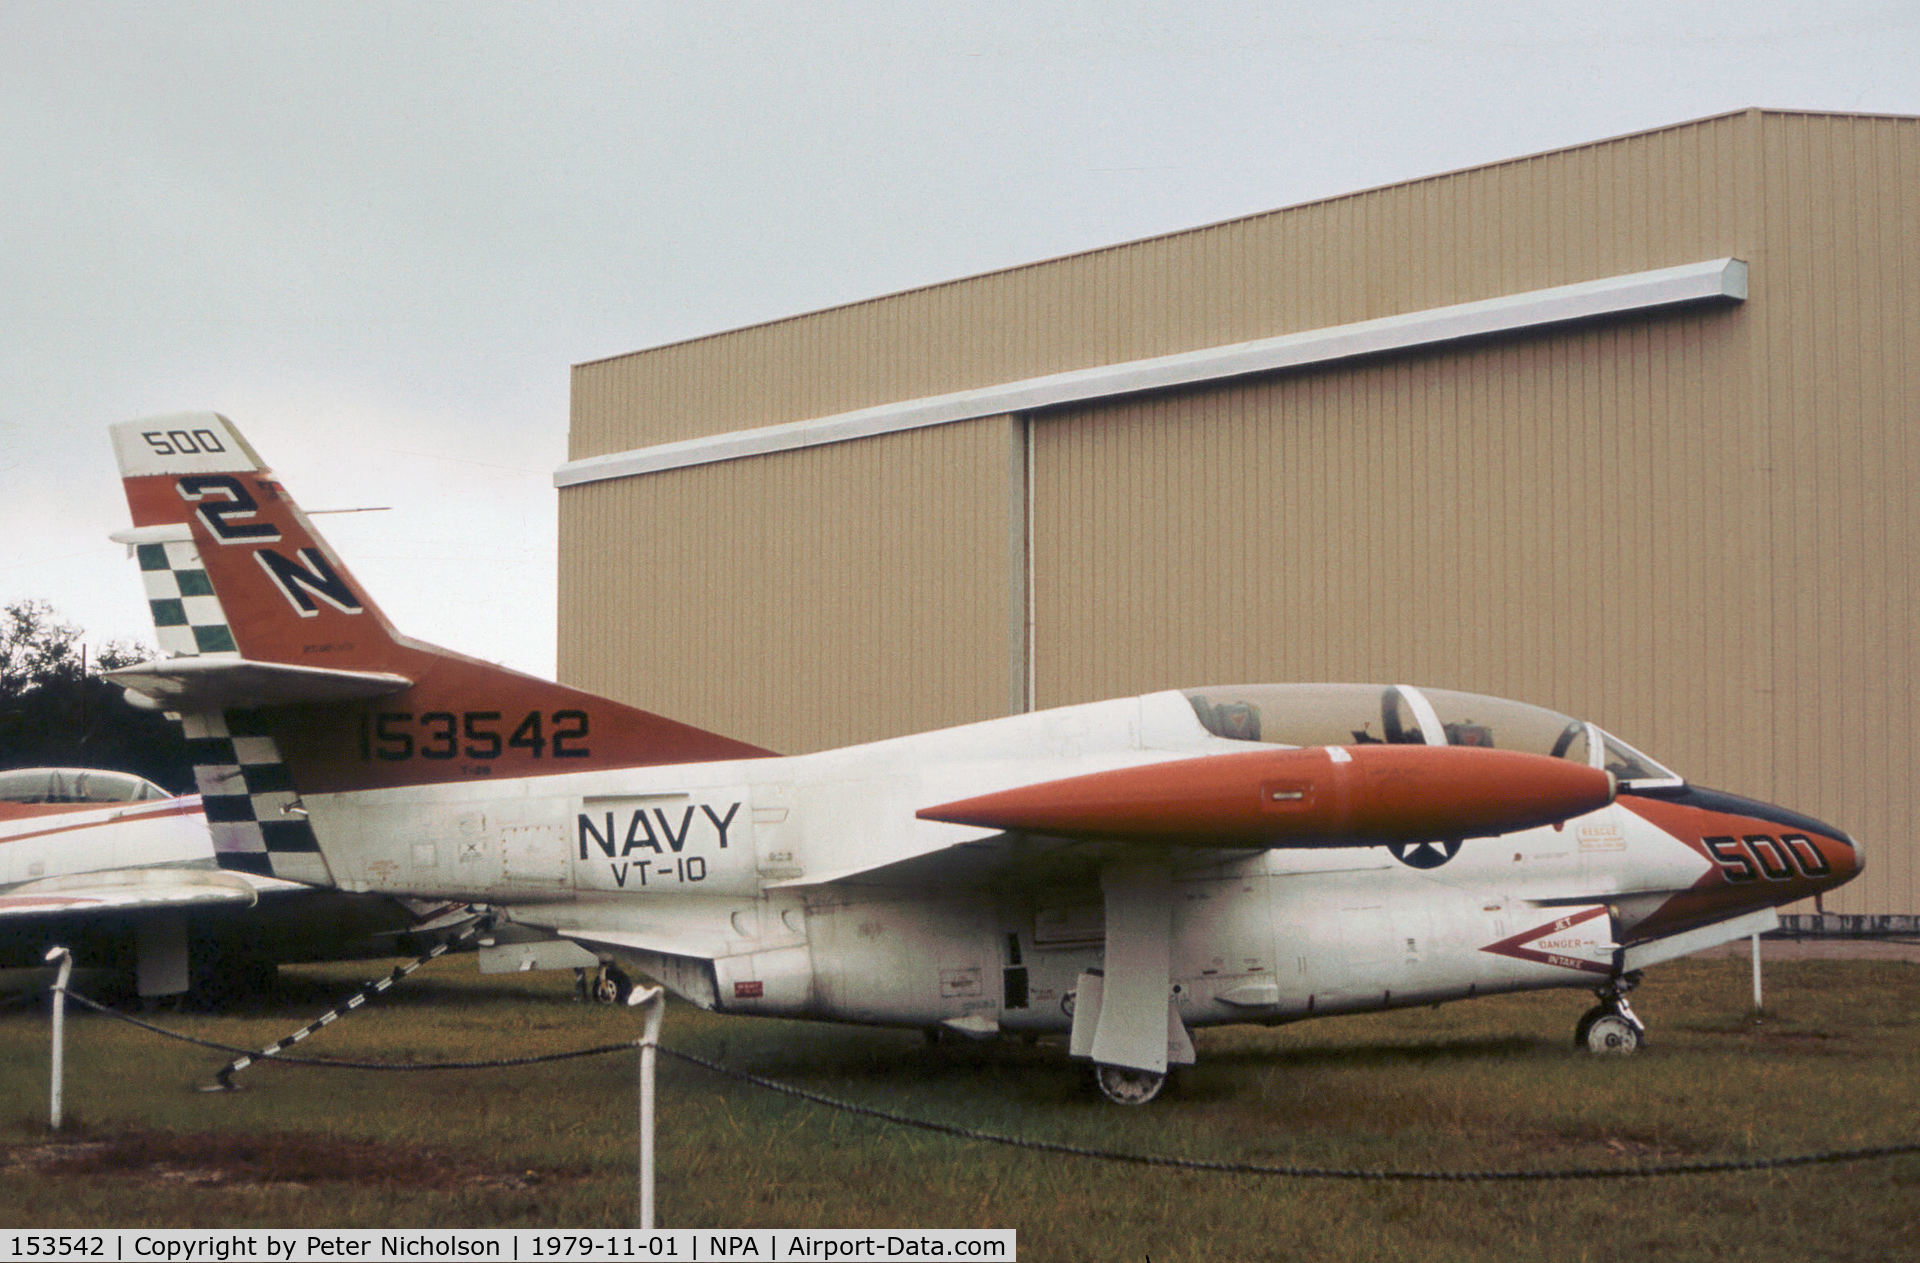 153542, North American T-2B Buckeye C/N 294-5, T-2B Buckeye of Training Squadron VT-10 as seen at the Naval Air Museum at Pensacola in November 1979.